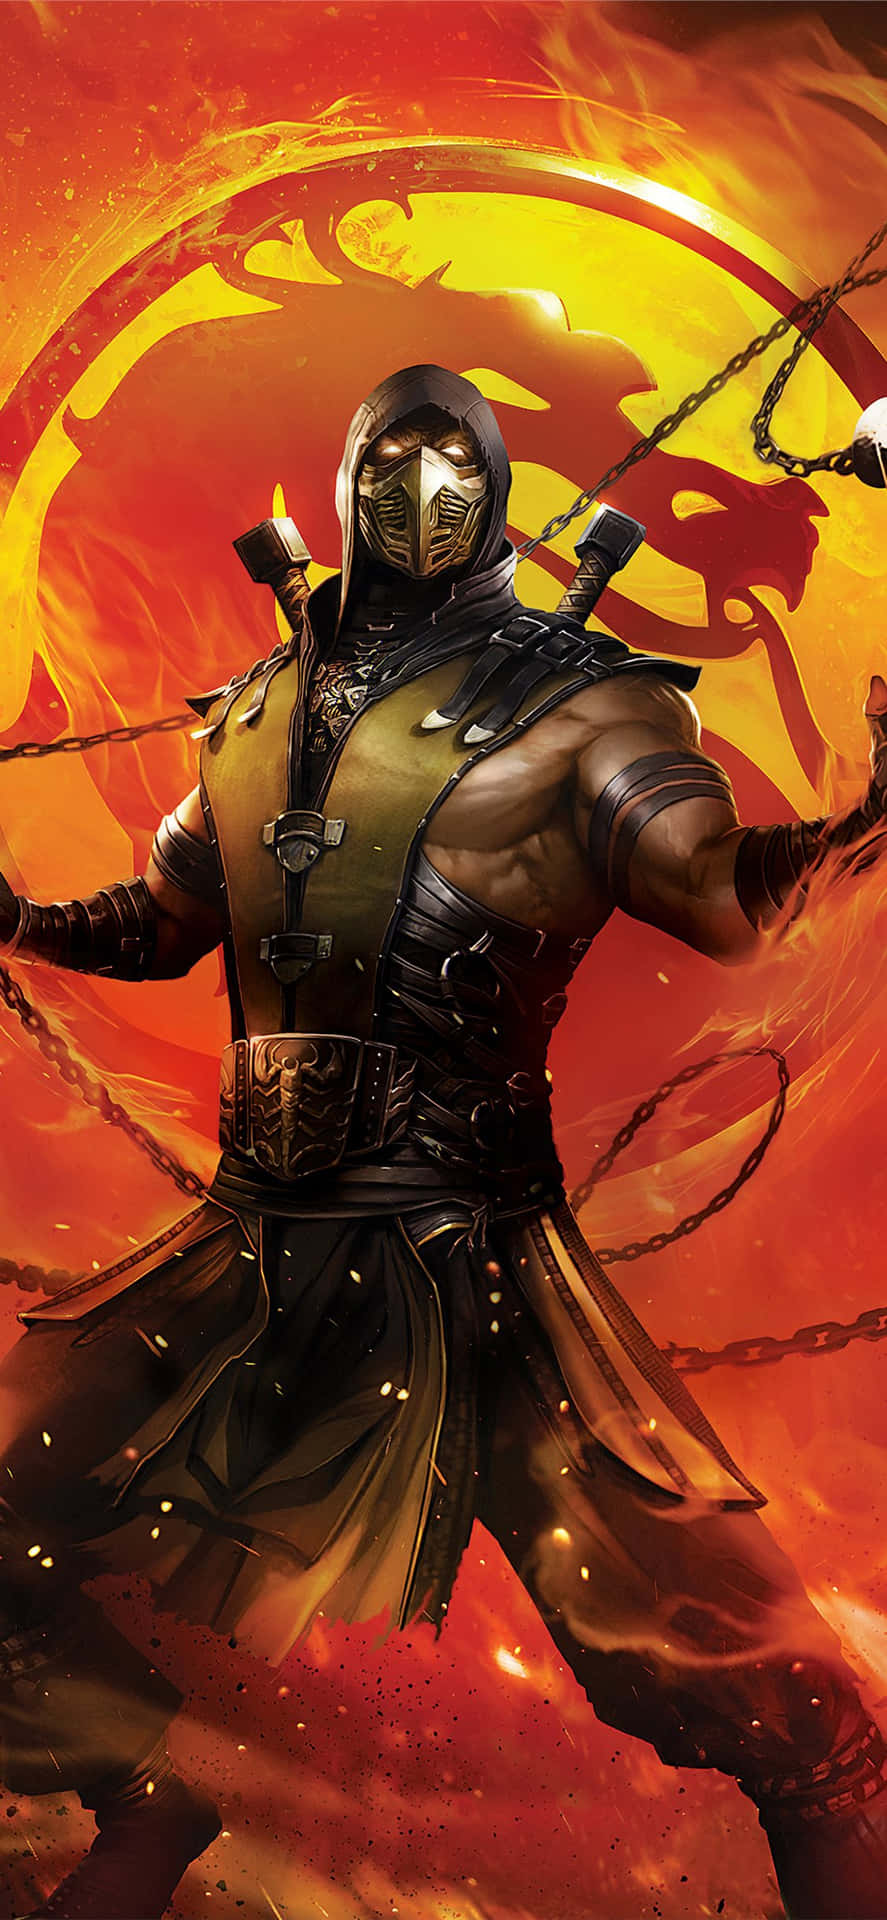 Take the battle to the next level with Mortal Kombat, now available on iPhone. Wallpaper